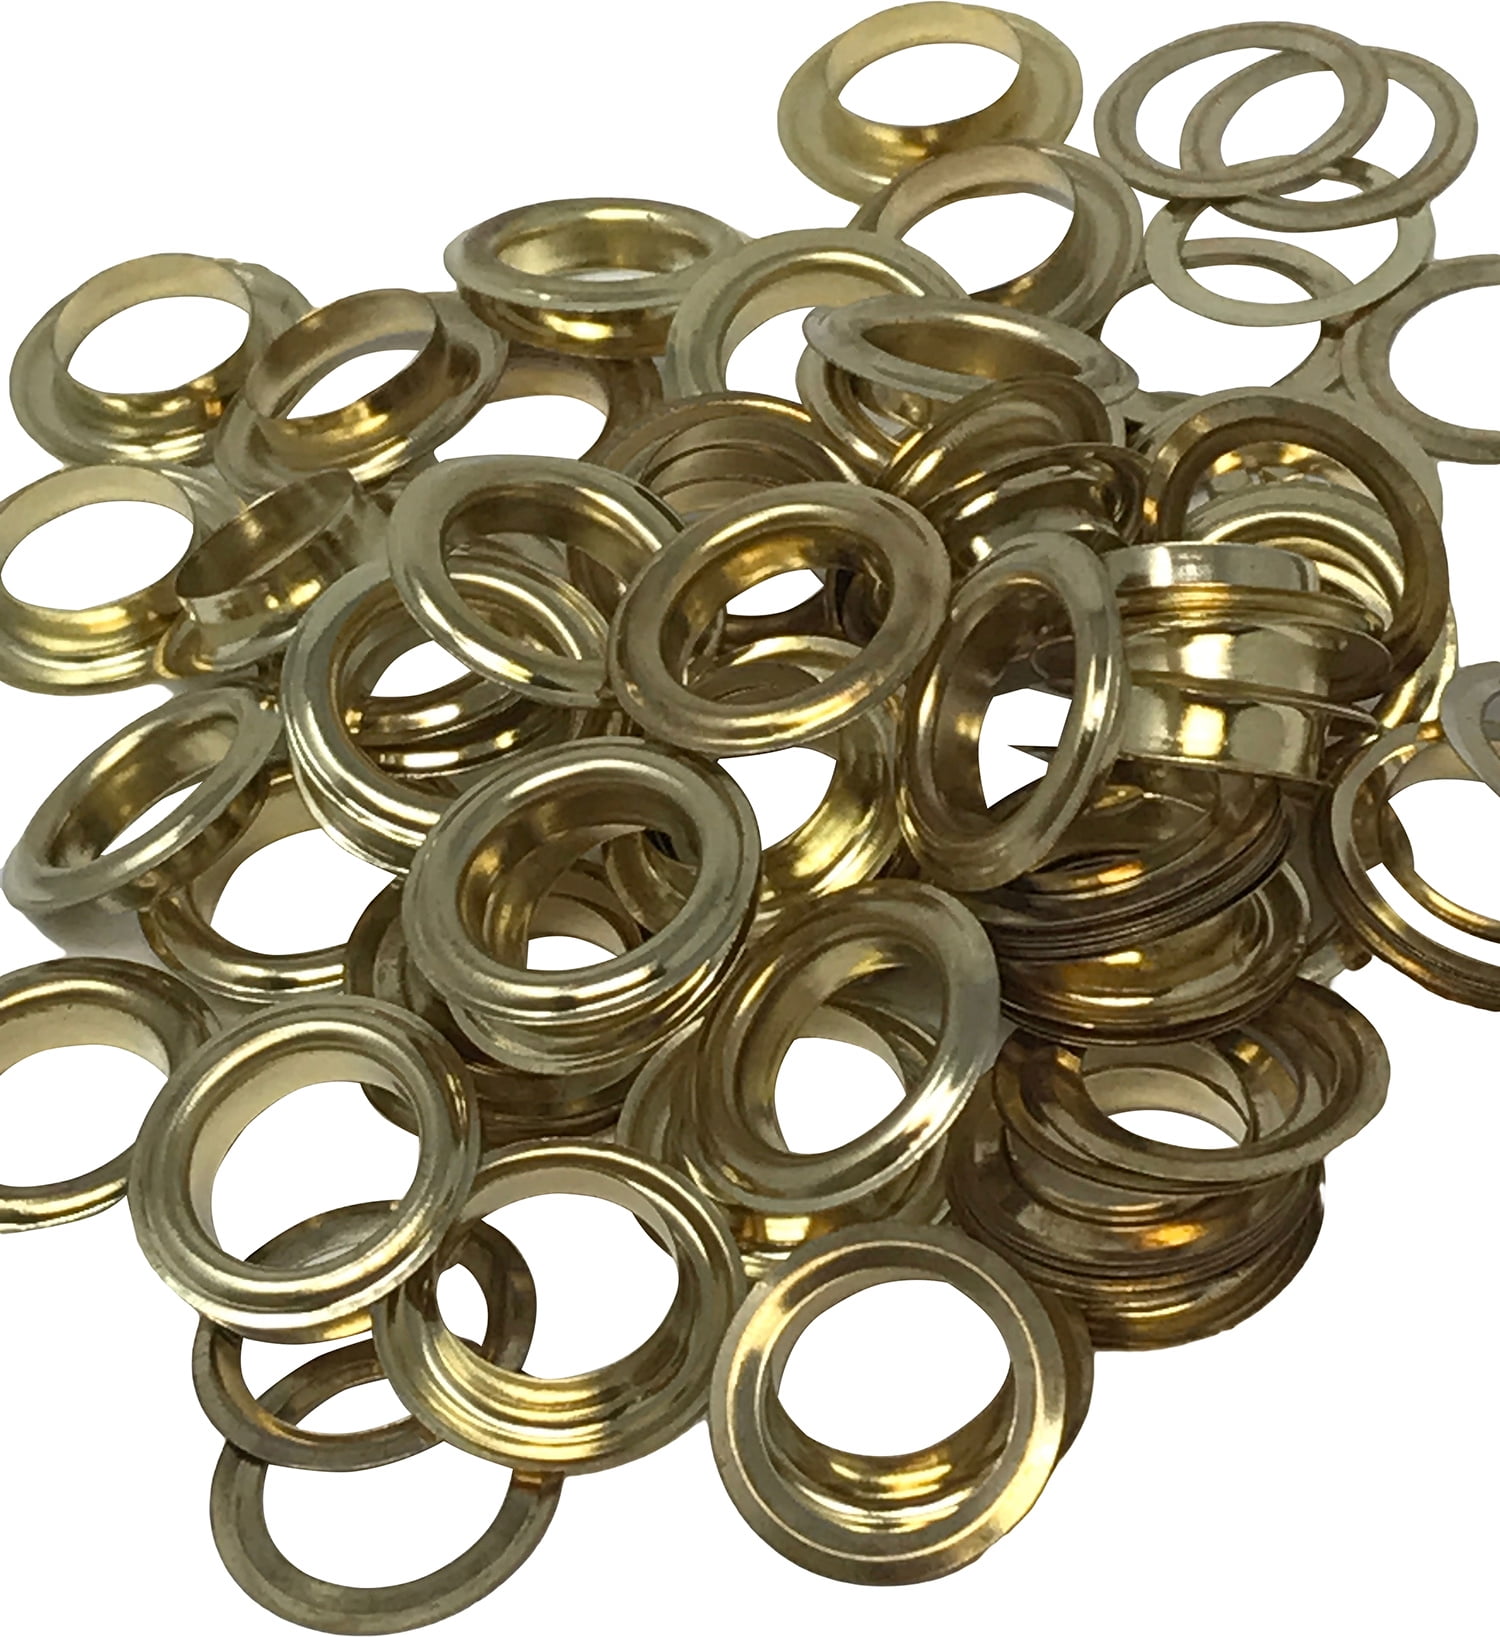 24 Pack 1/2" Brass-Plated Grommet Replacement Repair Tarp Tent Awning Cover 